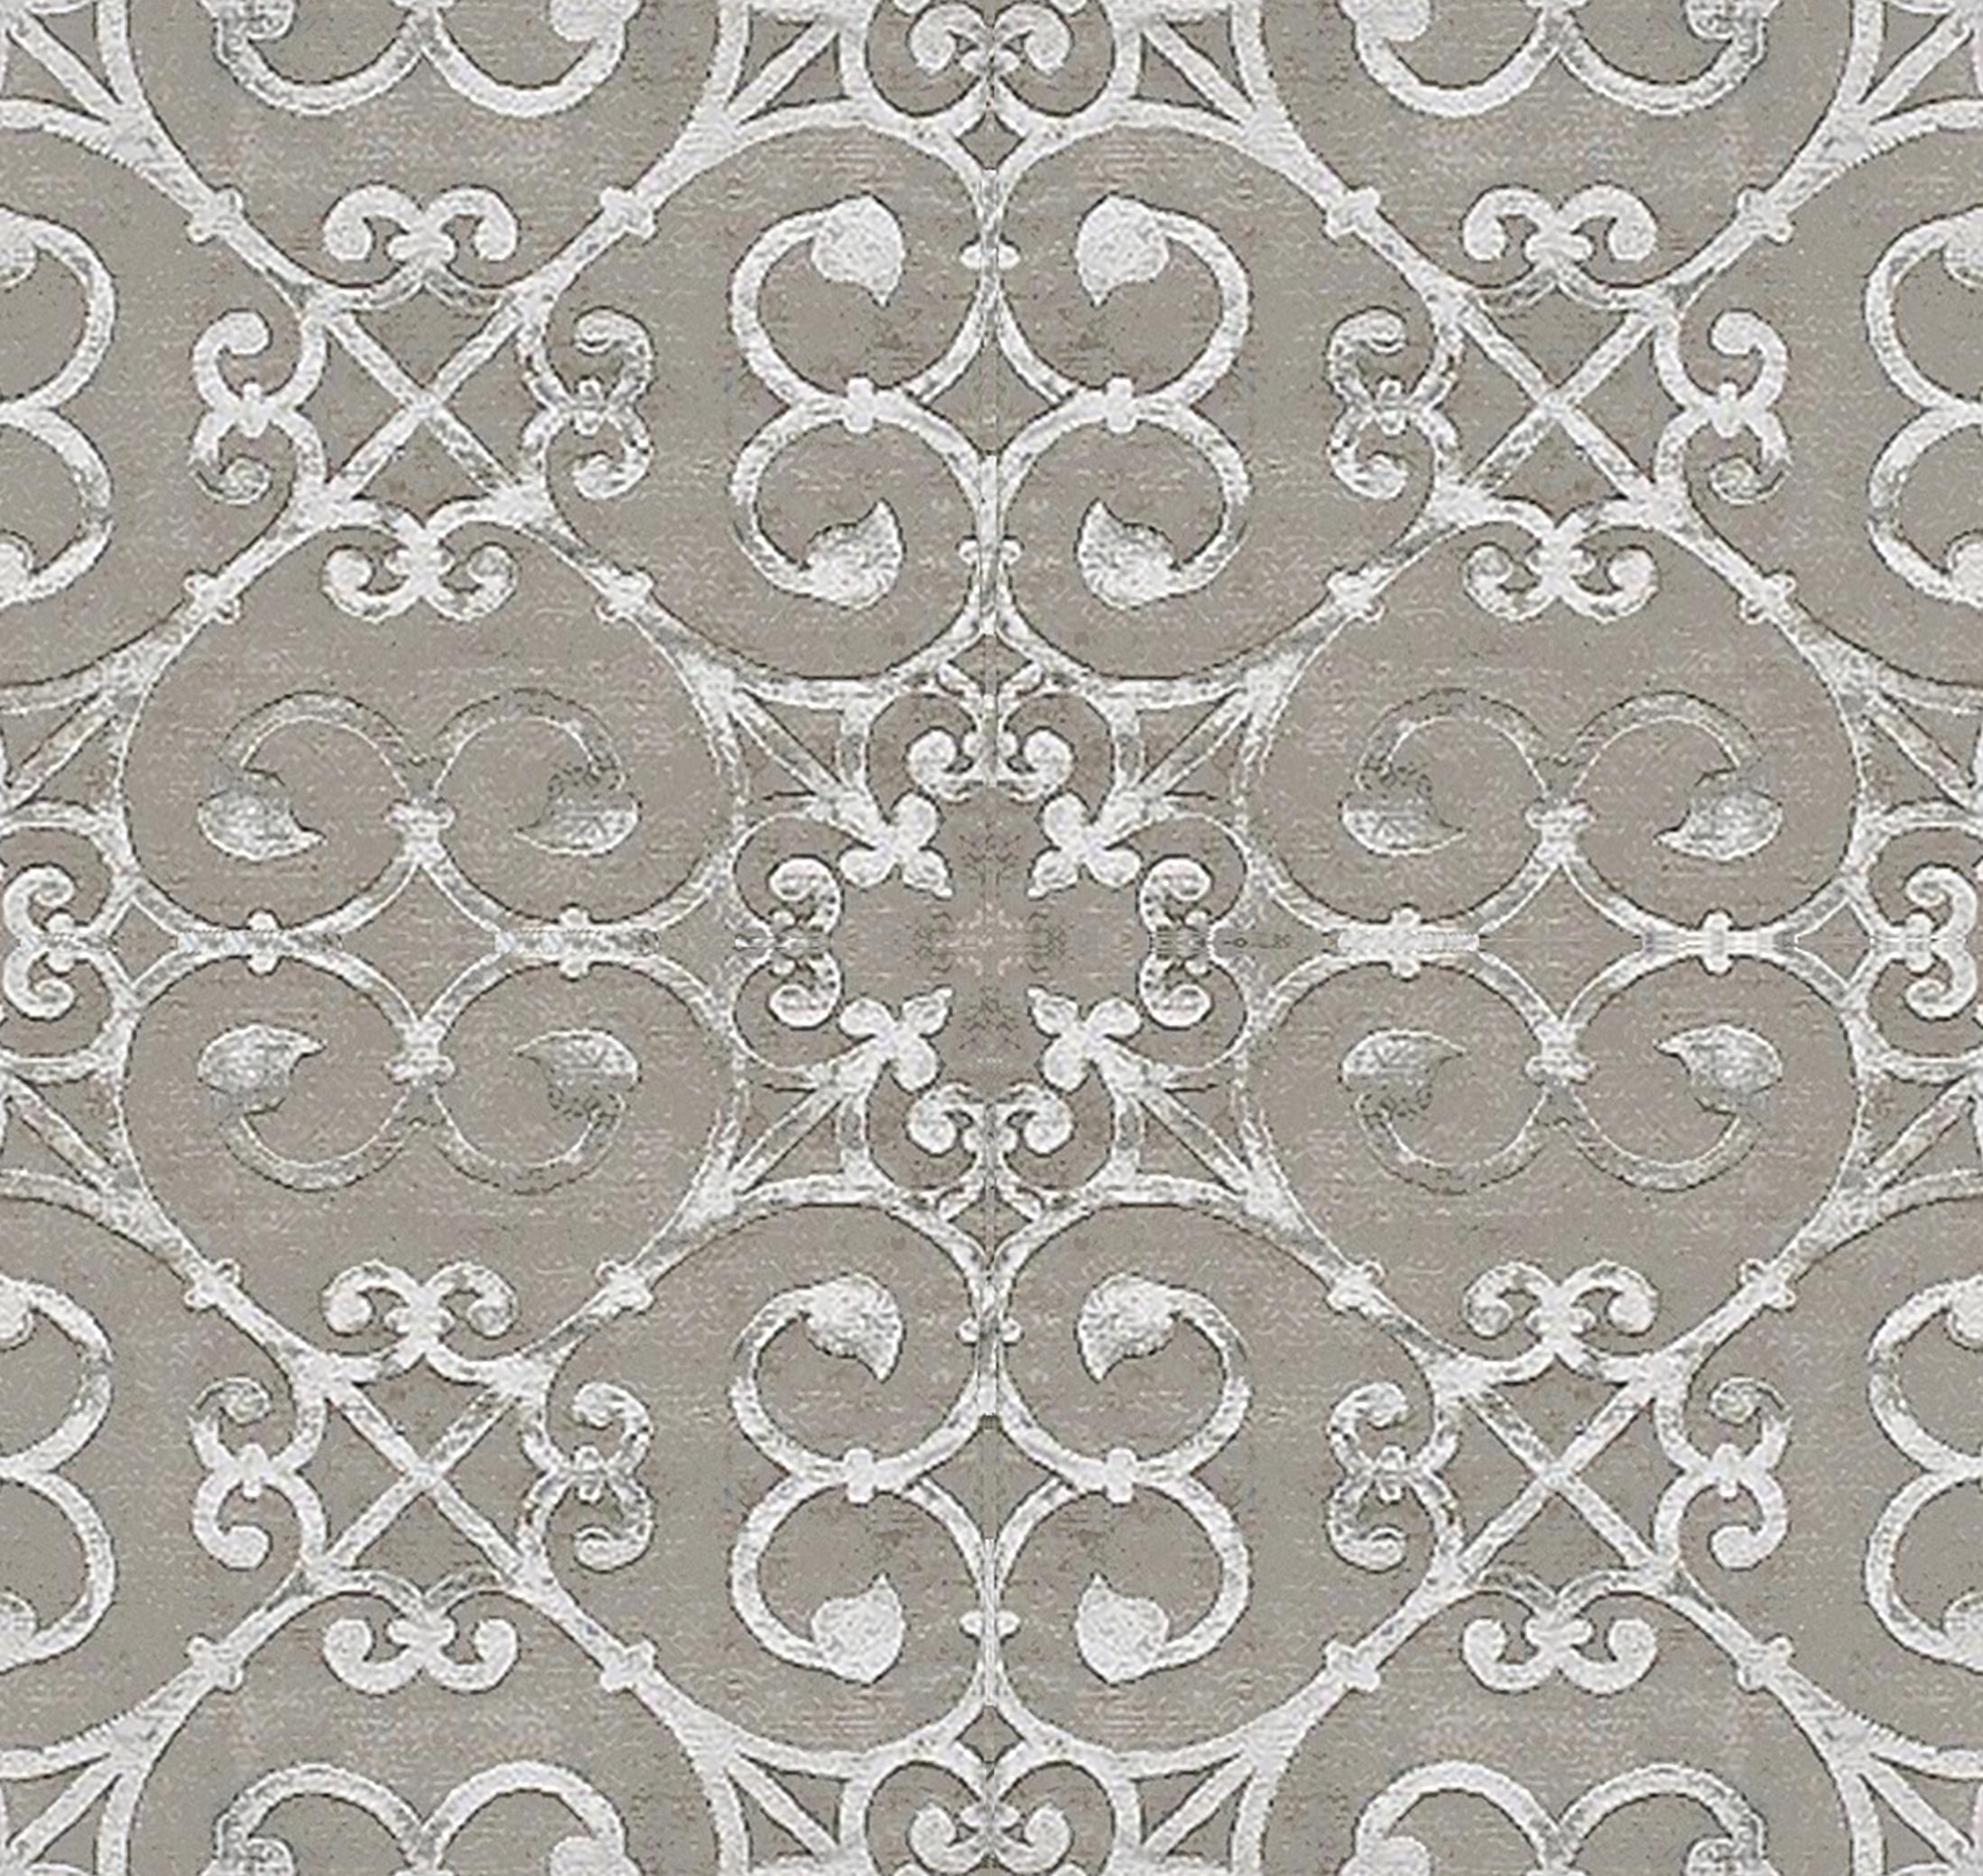 Great tribute to the working of wrought iron, material which has been able to decorate the most prestigious buildings in the world. 
This rug is hand knotted in Nepal by our artisans by using 50% silk and 50% fine Himalayan wool dyed using vegetable